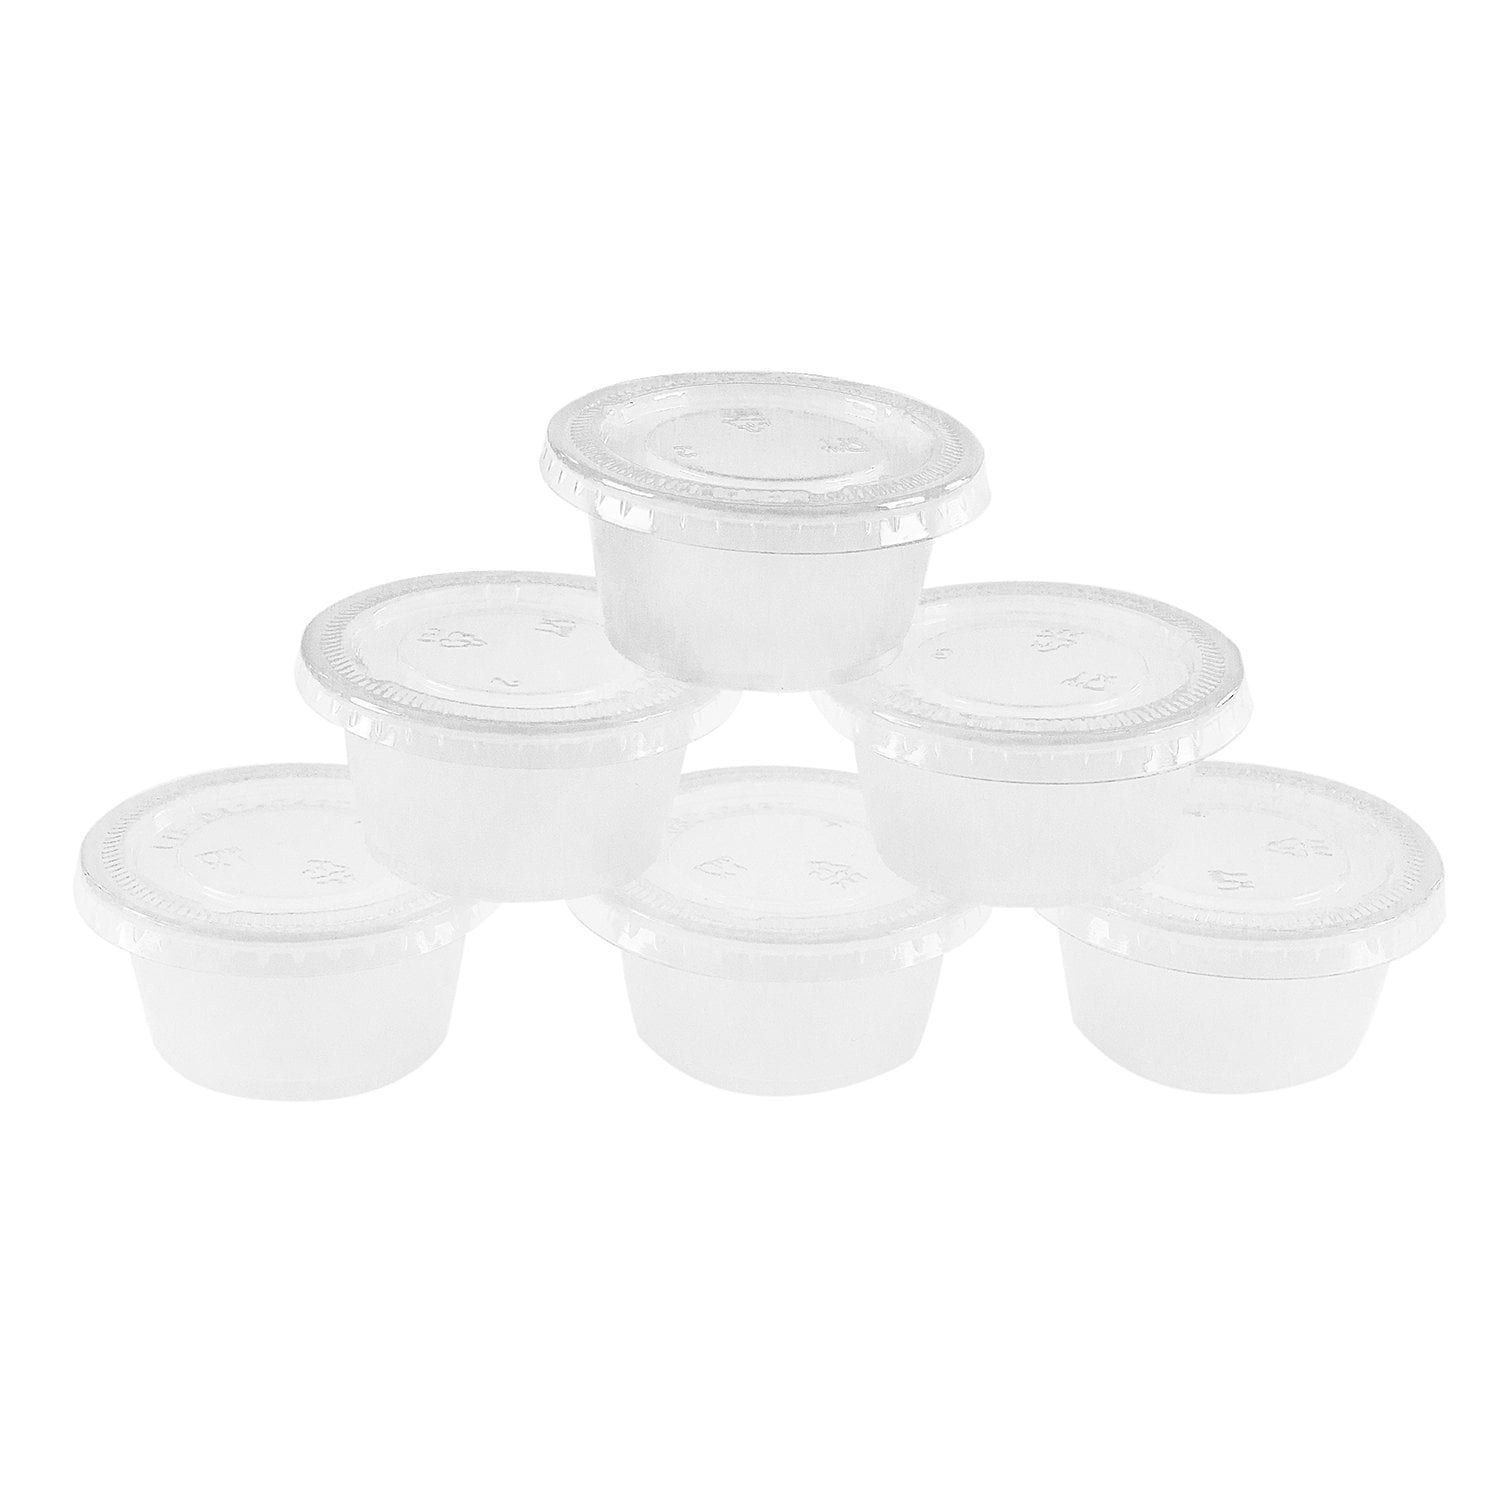 125 Count Mini Translucent Plastic Jello Shot Condiment Sauce Cups with Lids  for Restaurants, Dips & Salsa, 2-Ounce by Super Z Outlet 